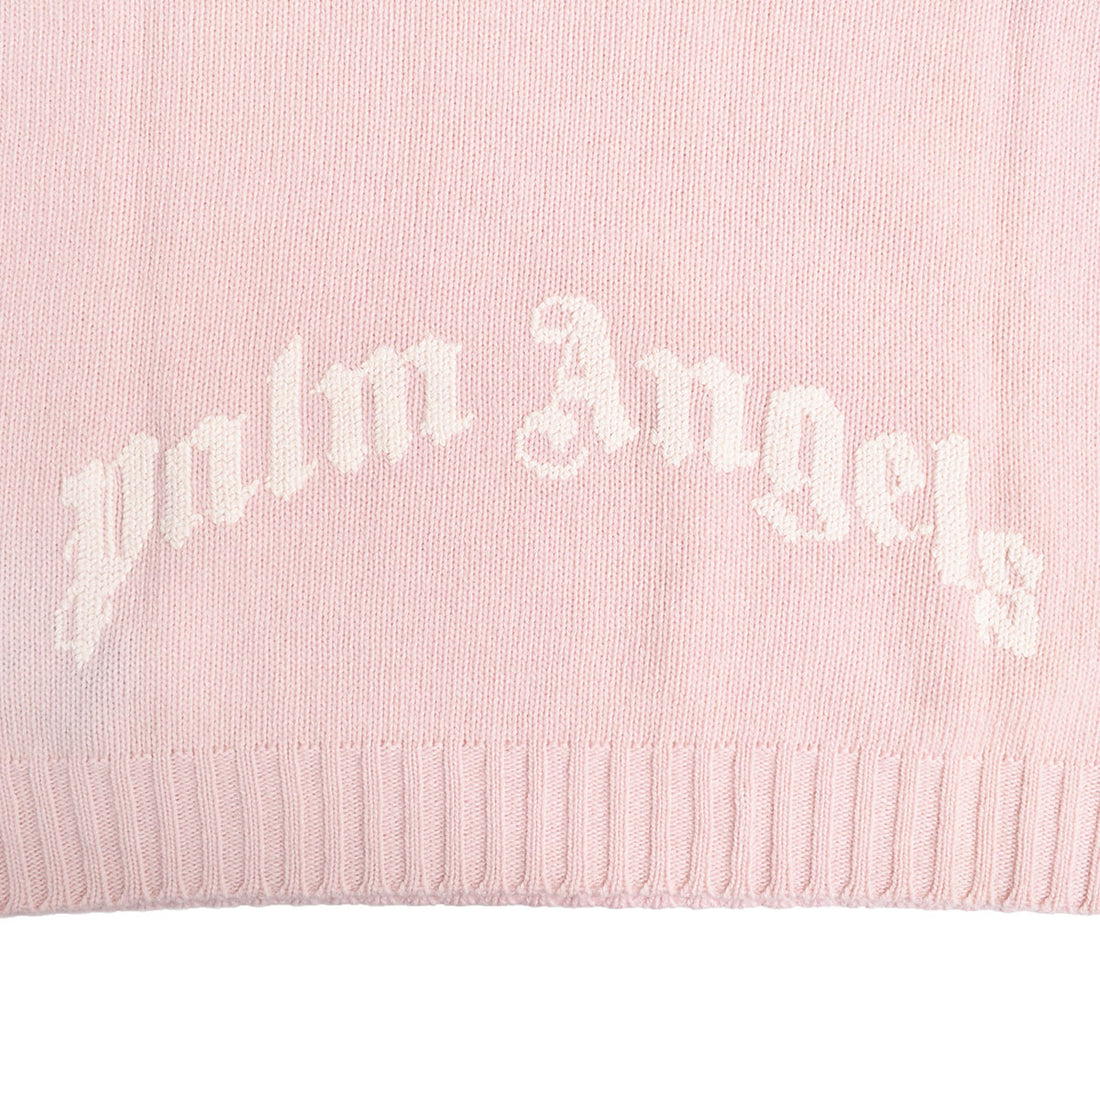 [Palm Angels]CURVED LOGO SWEATERREC/PPINK/WHITE(PMHR24-247)